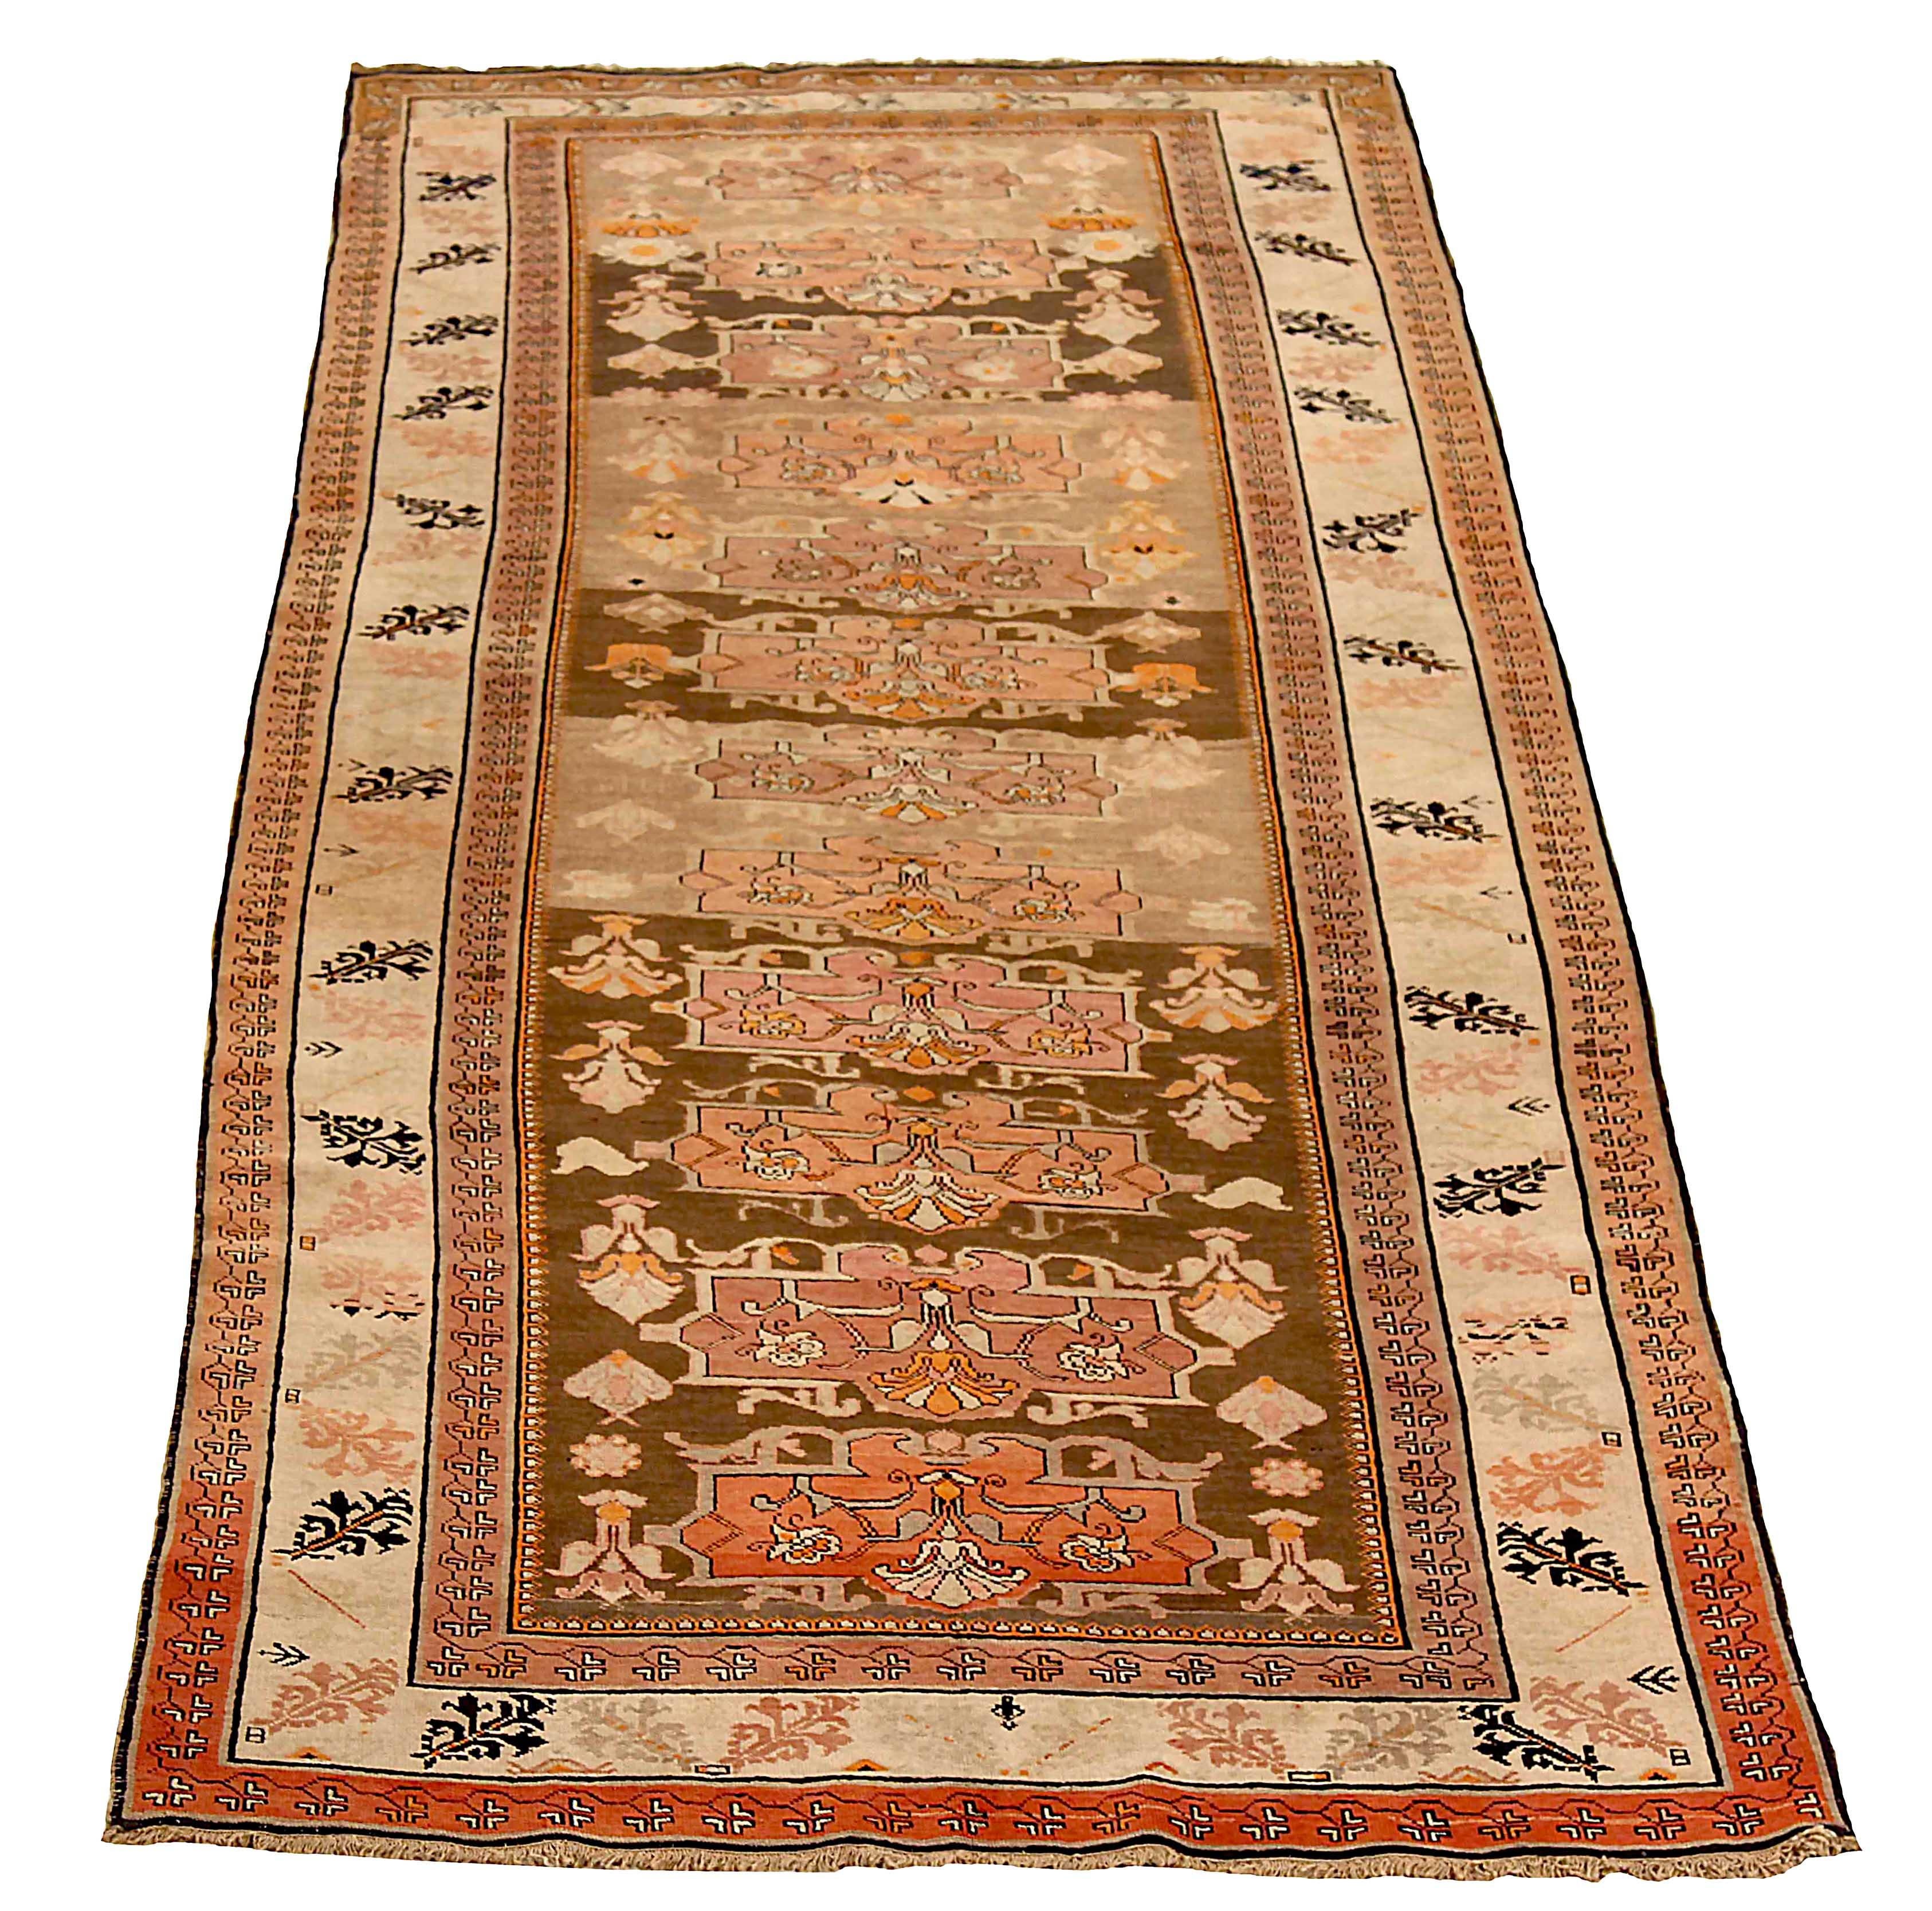 Antique Russian runner rug handwoven from the finest sheep’s wool. It’s colored with all-natural vegetable dyes that are safe for humans and pets. It’s a traditional Karebagh design handwoven by expert artisans. It’s a lovely runner rug that can be